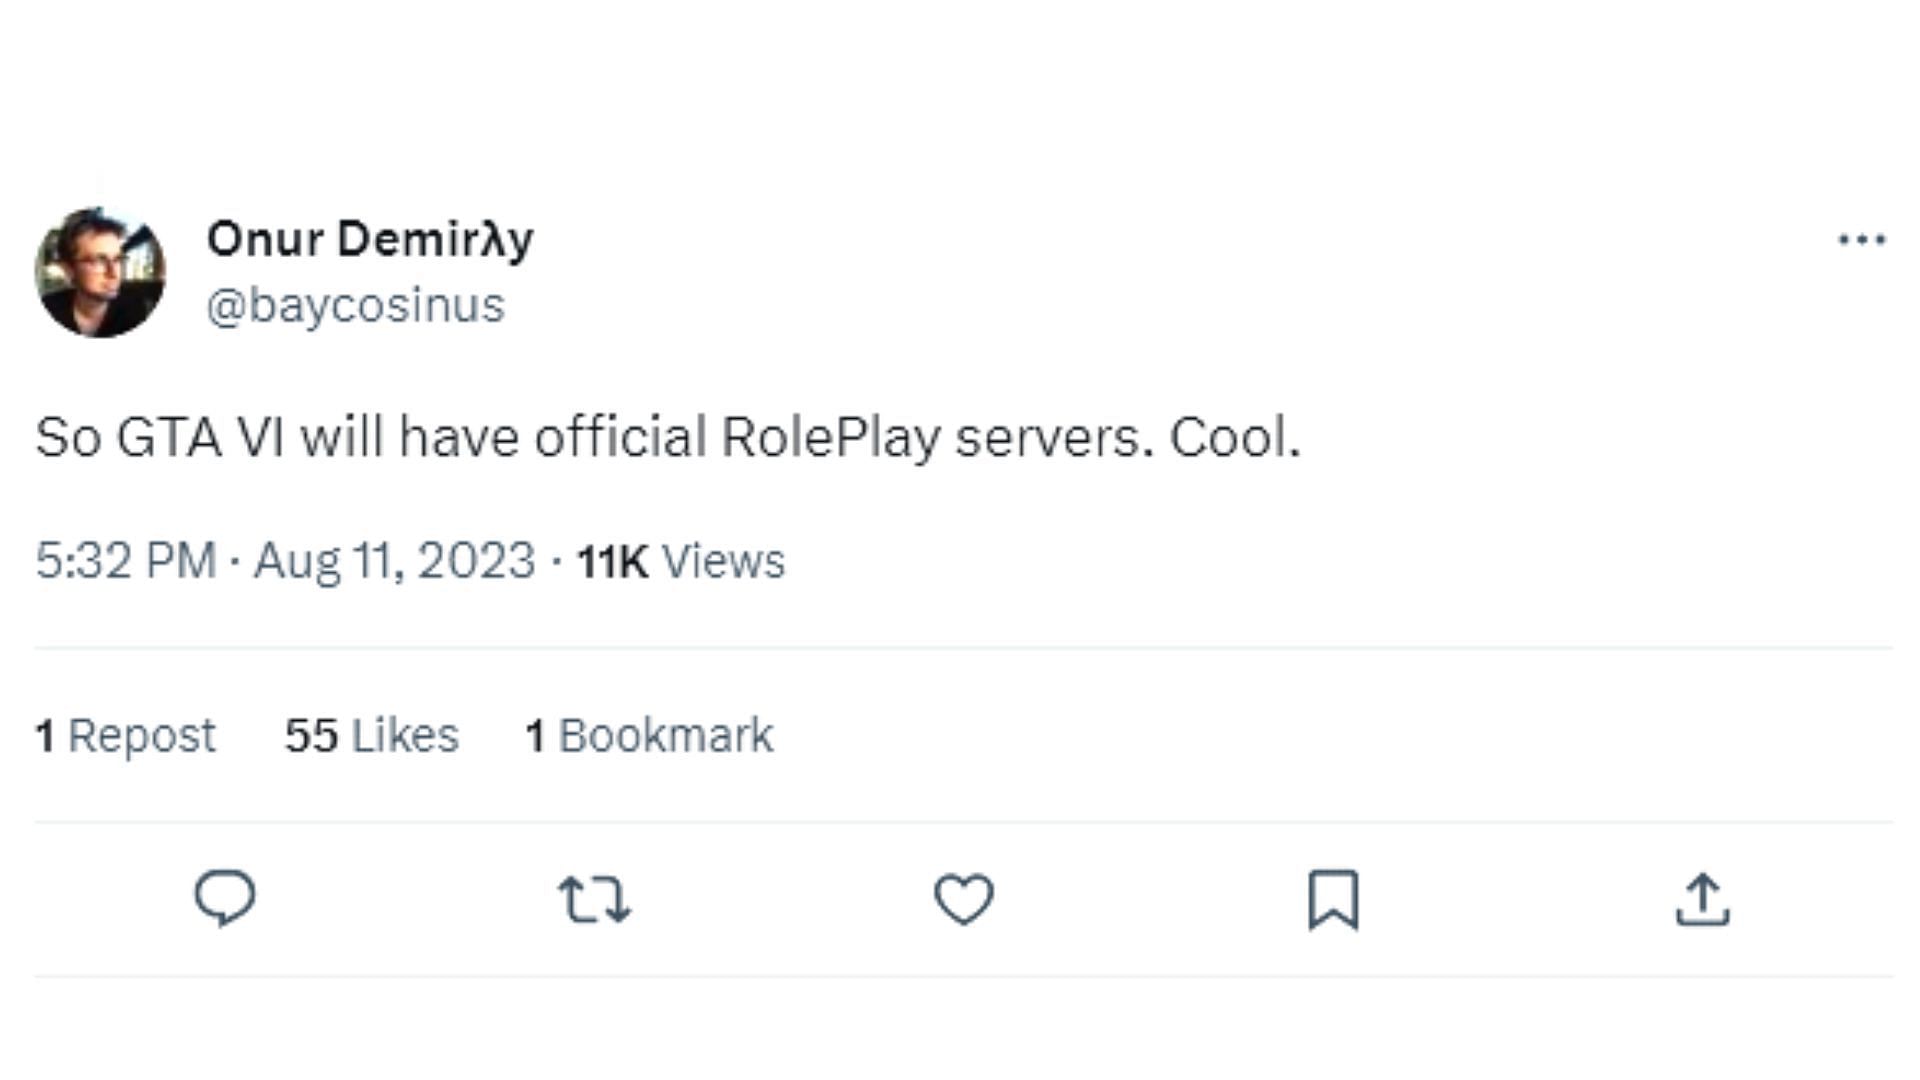 Fans speculate the possibility of the next game having official RP servers (Image via Twitter/baycosinus)